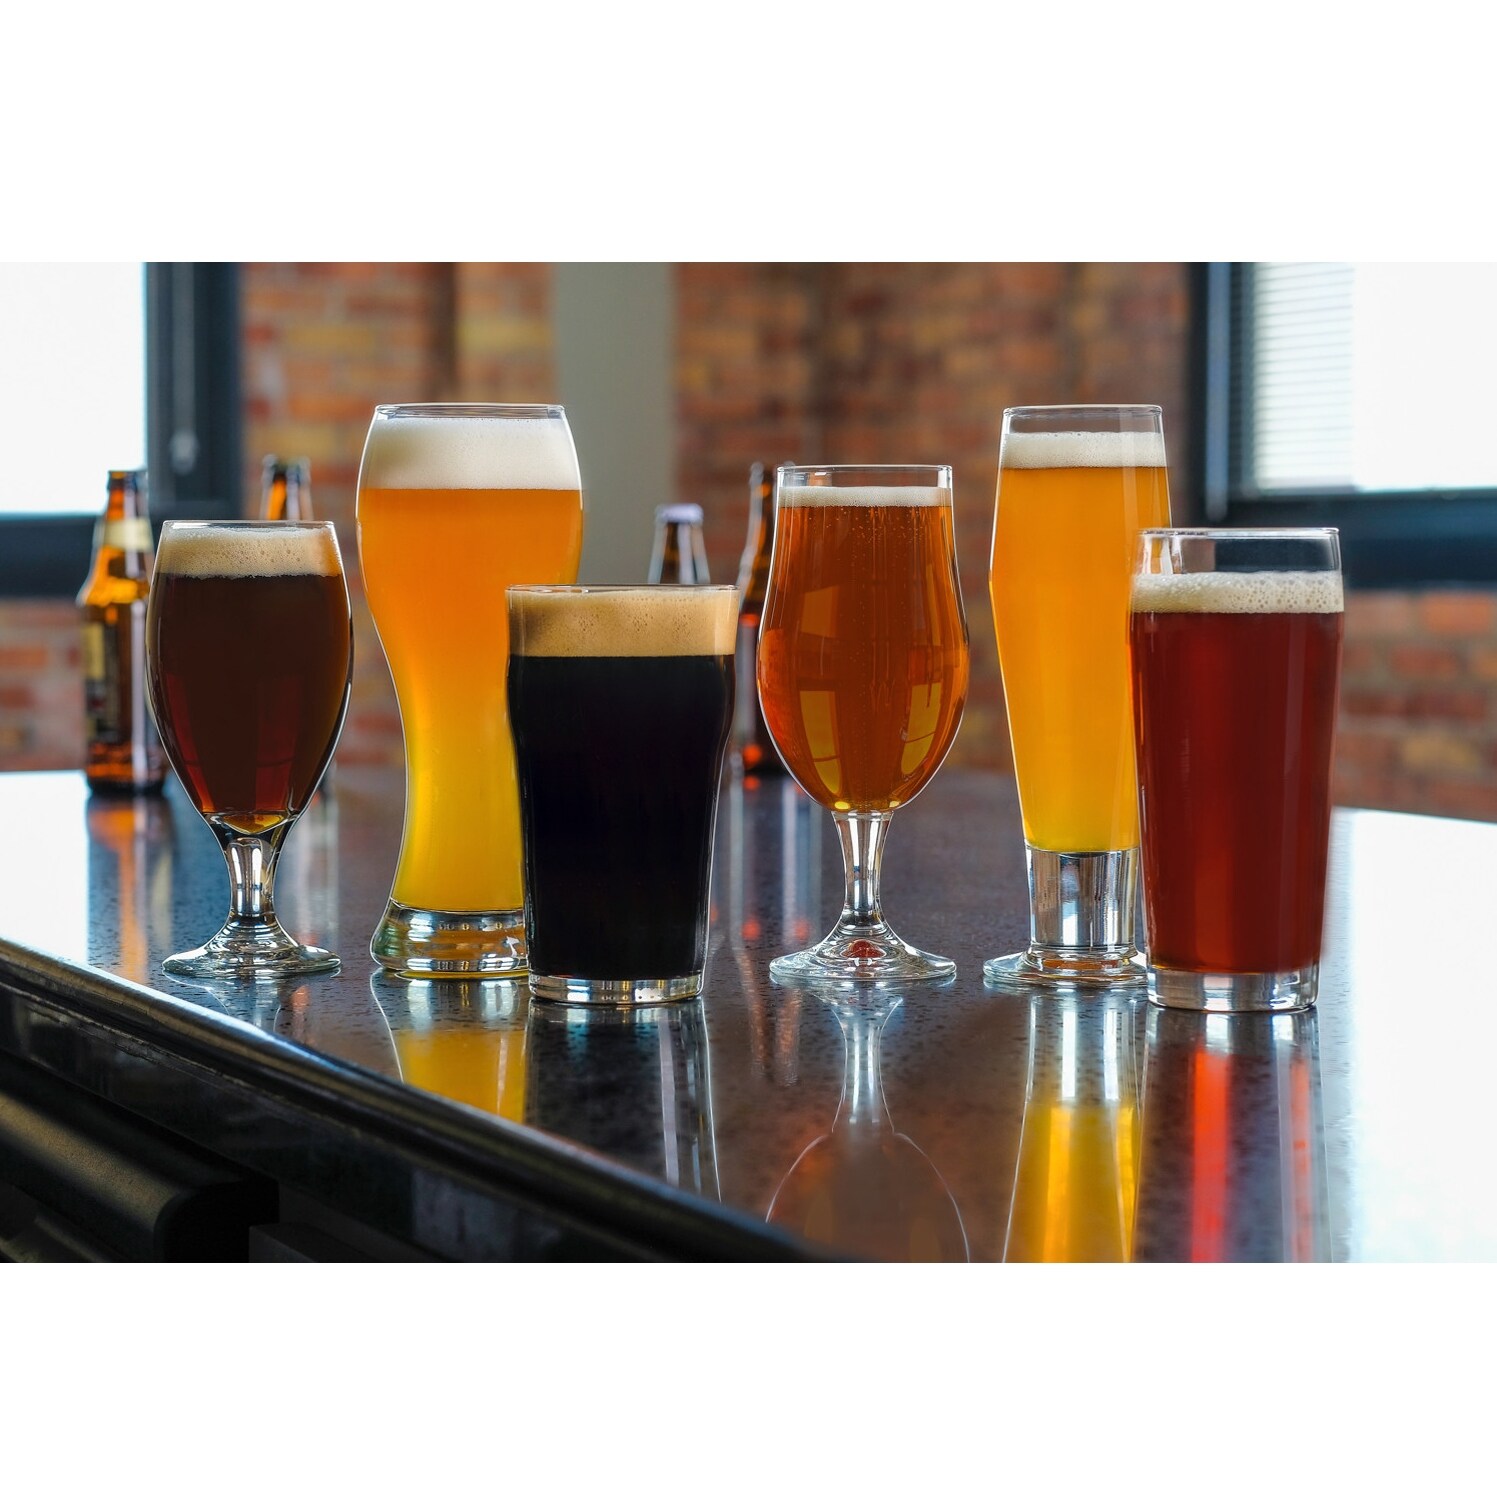 https://ak1.ostkcdn.com/images/products/is/images/direct/65641ac8de8727ced6acc269f94e3d95499a3c54/Libbey-Craft-Brews-Assorted-Beer-Glasses%2C-Set-of-6.jpg